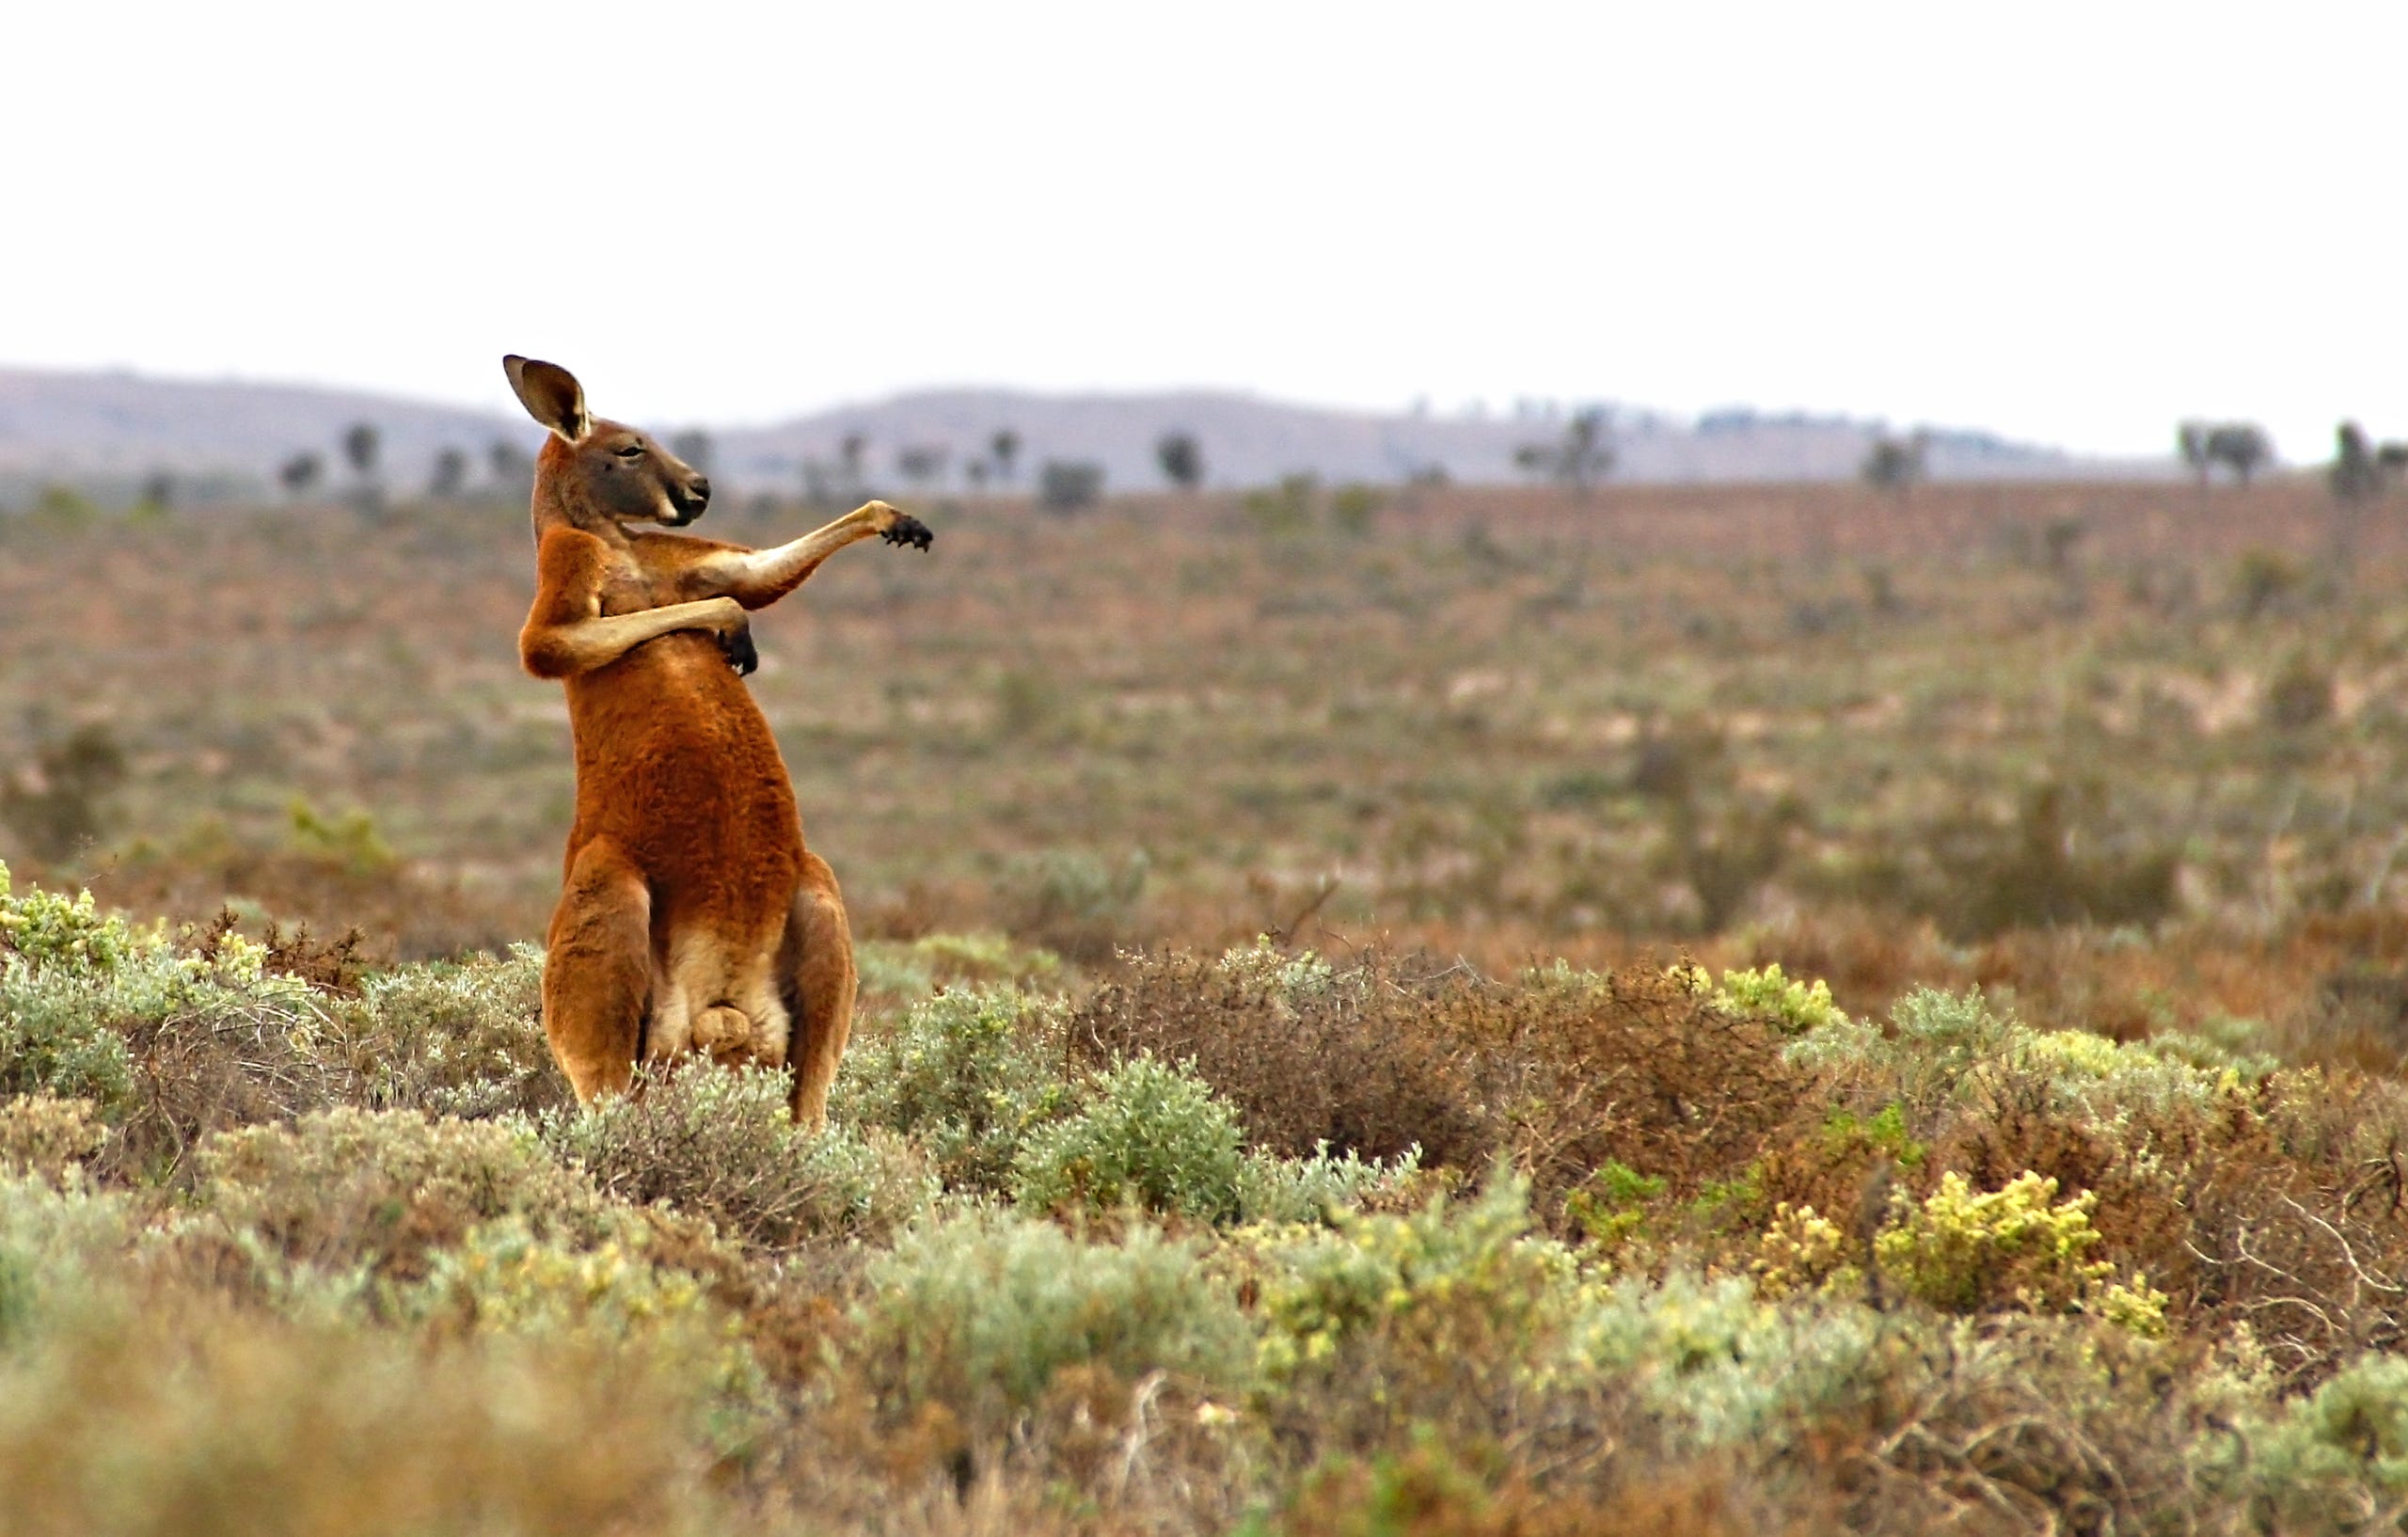 Wild red kangaroos are most active in the early morning.